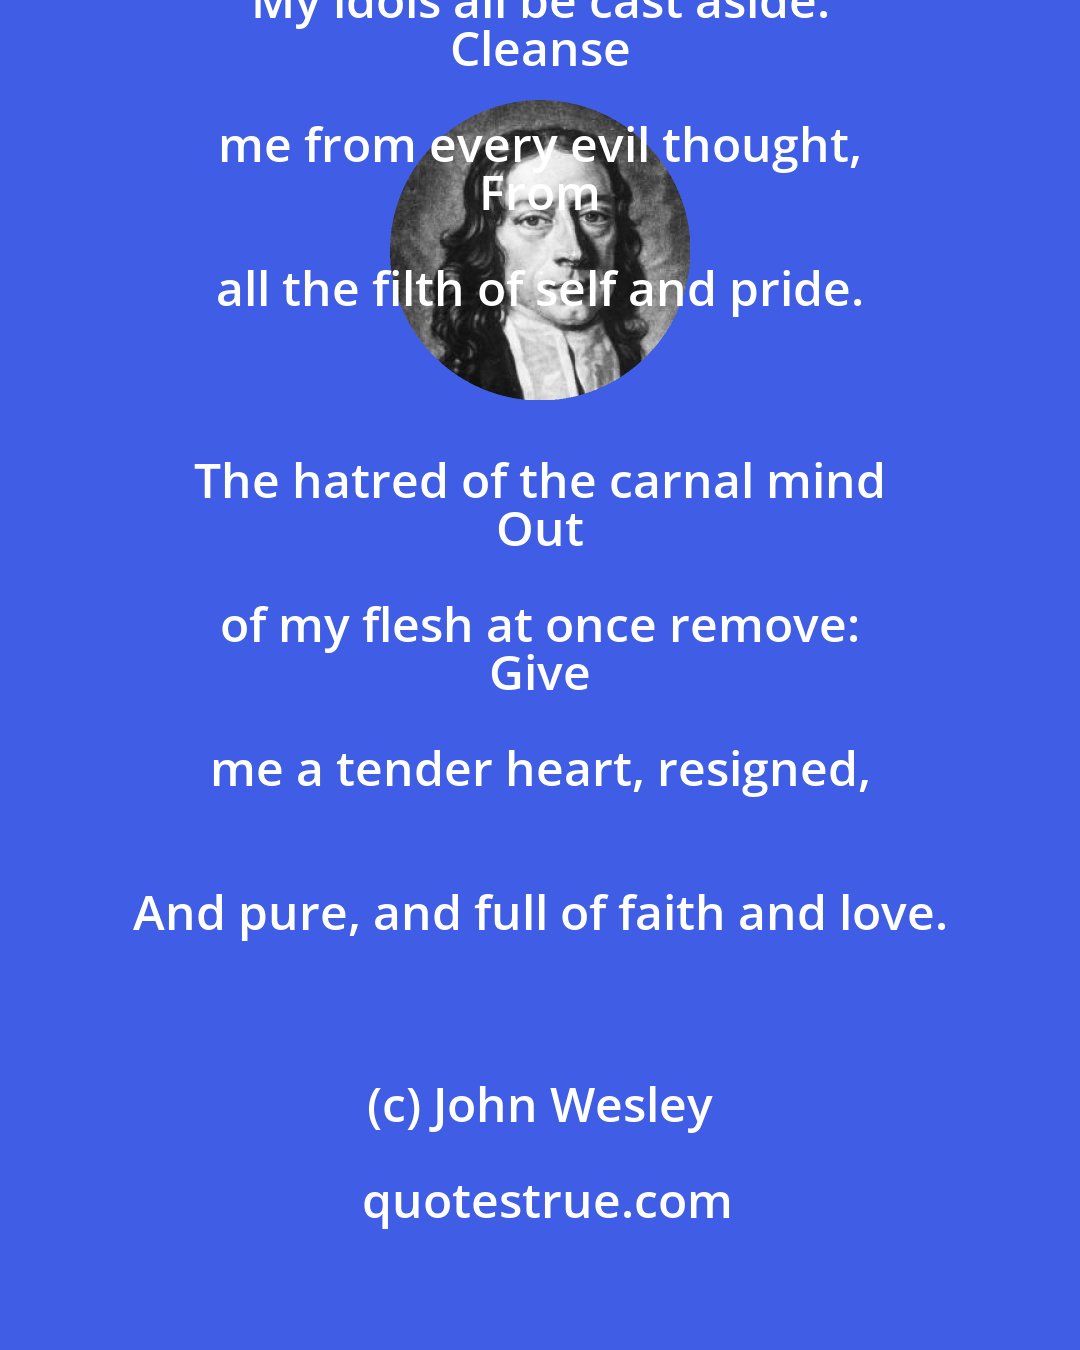 John Wesley: Purge me from every sinful blot; 
 My idols all be cast aside: 
 Cleanse me from every evil thought, 
 From all the filth of self and pride. 
 
 The hatred of the carnal mind 
 Out of my flesh at once remove: 
 Give me a tender heart, resigned, 
 And pure, and full of faith and love.